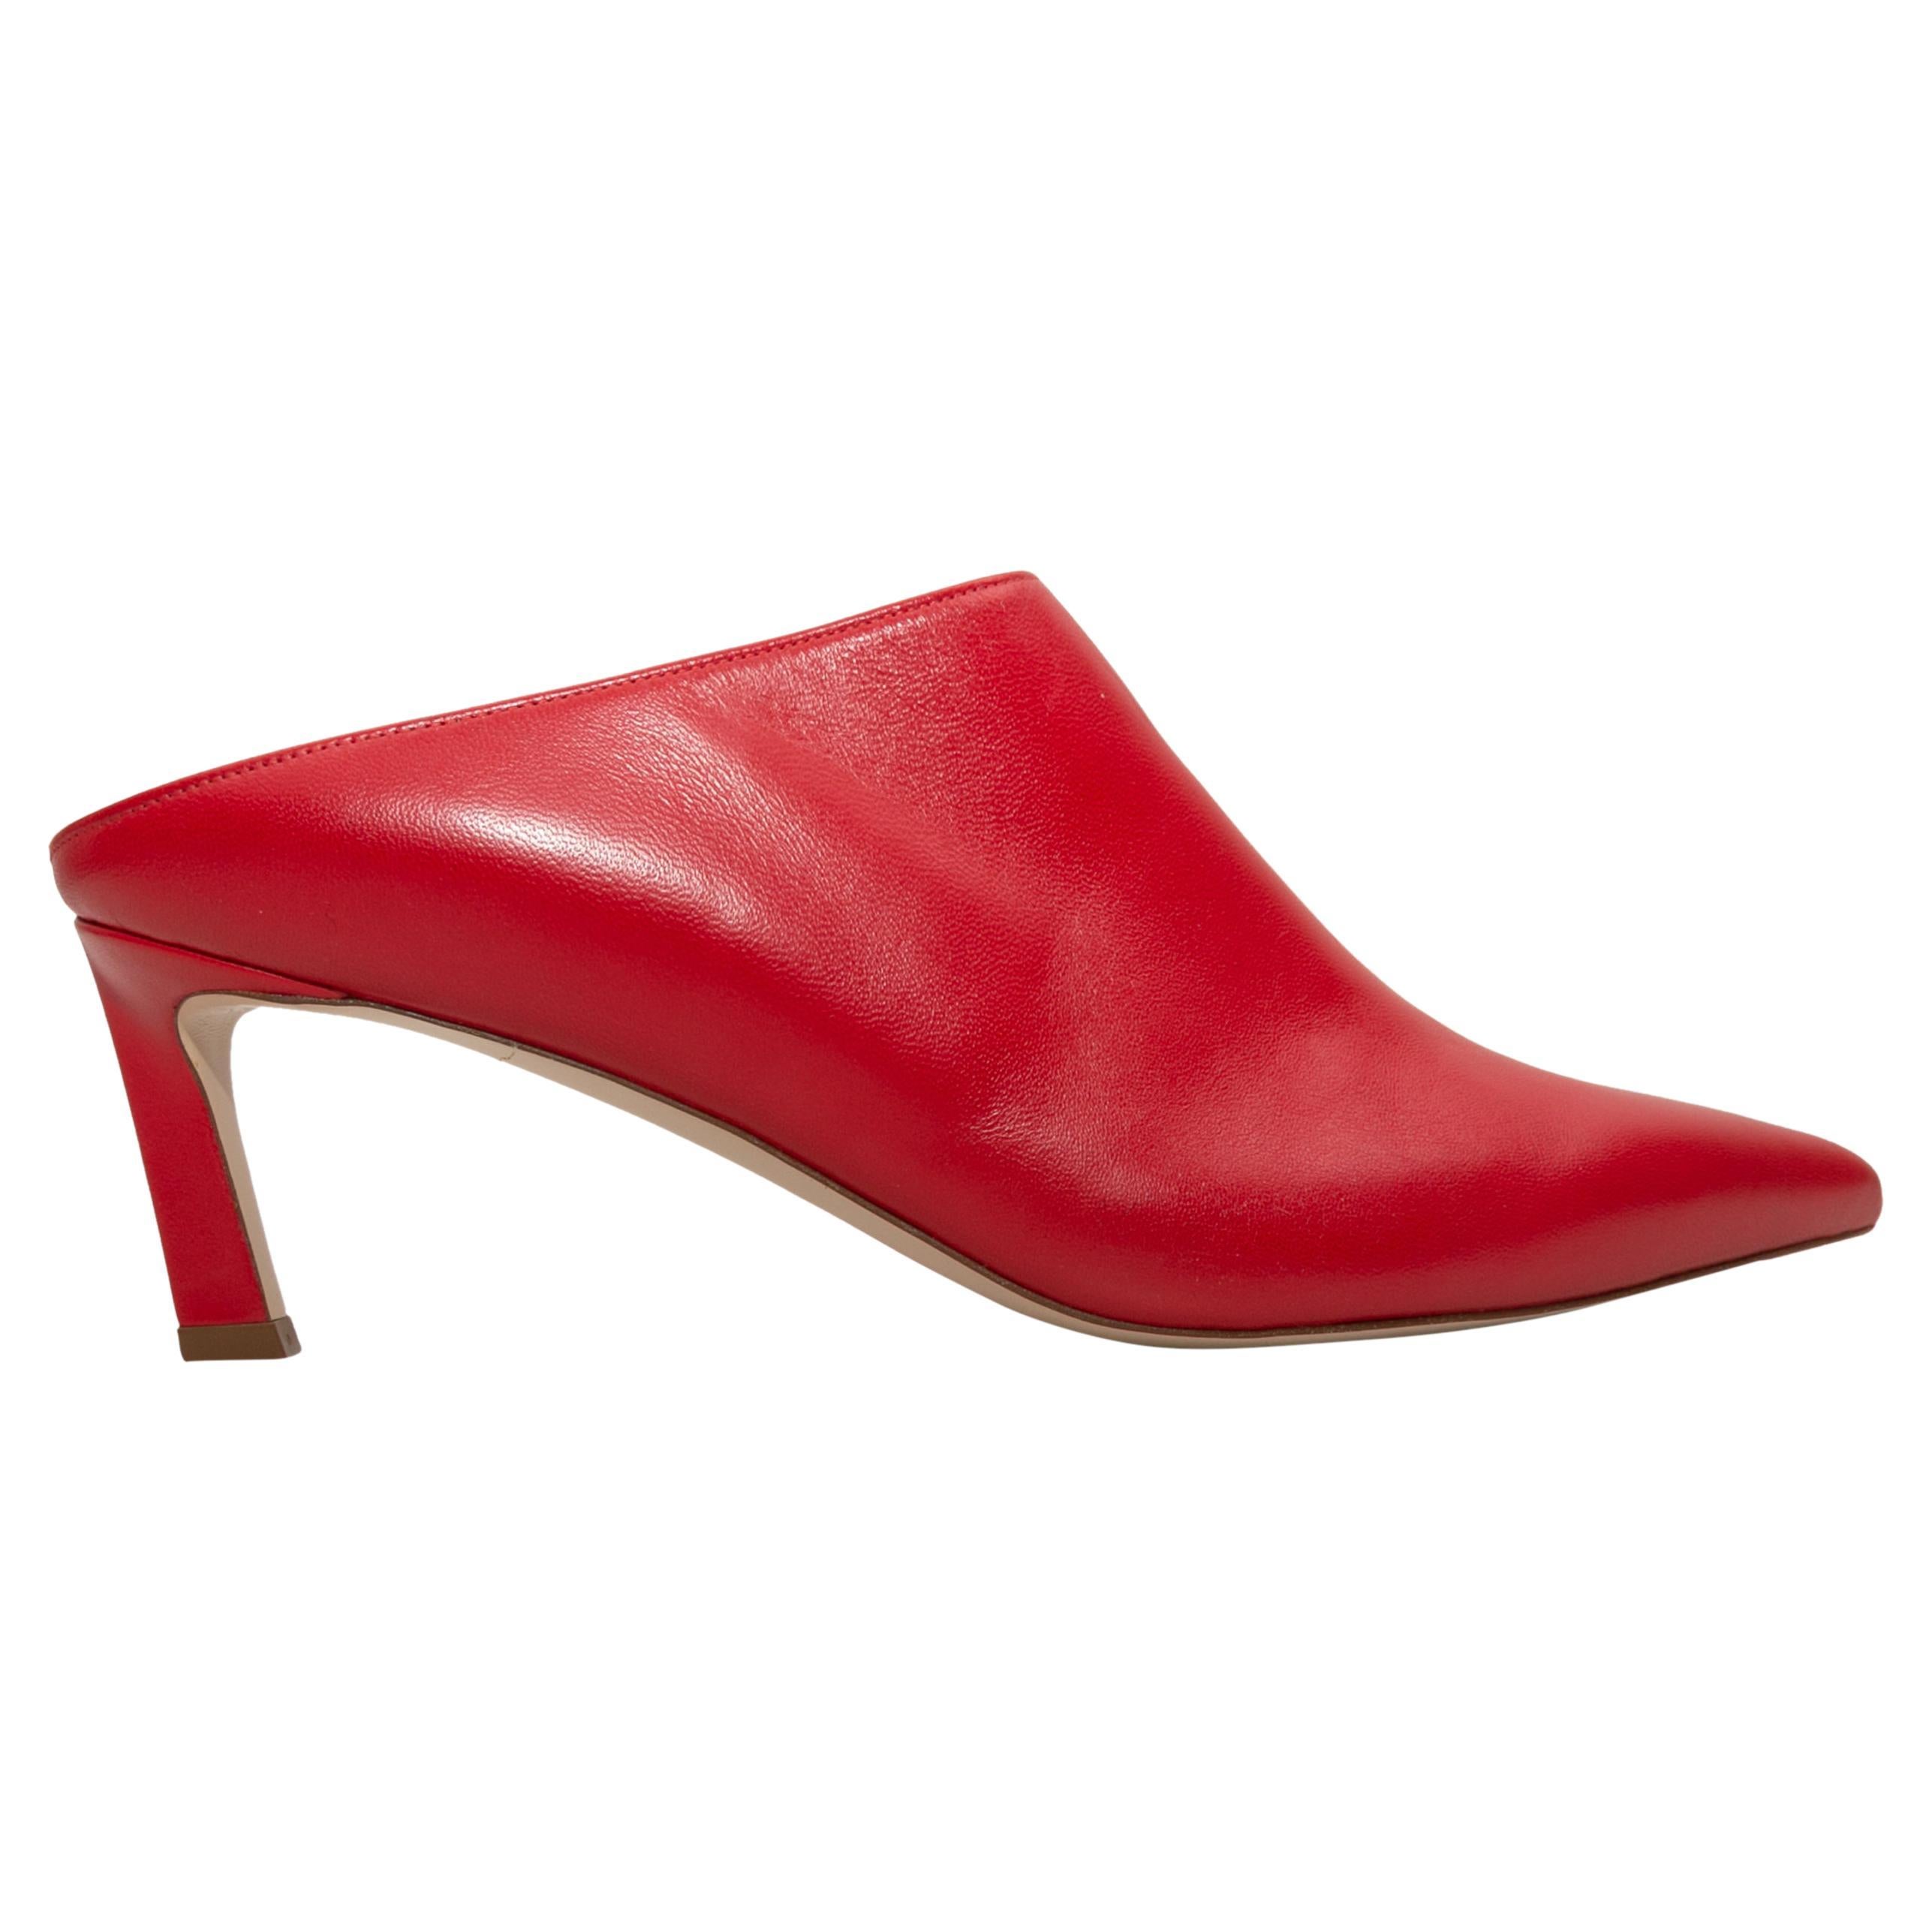 Stuart Weitzman Red Leather Pointed-Toe Mules